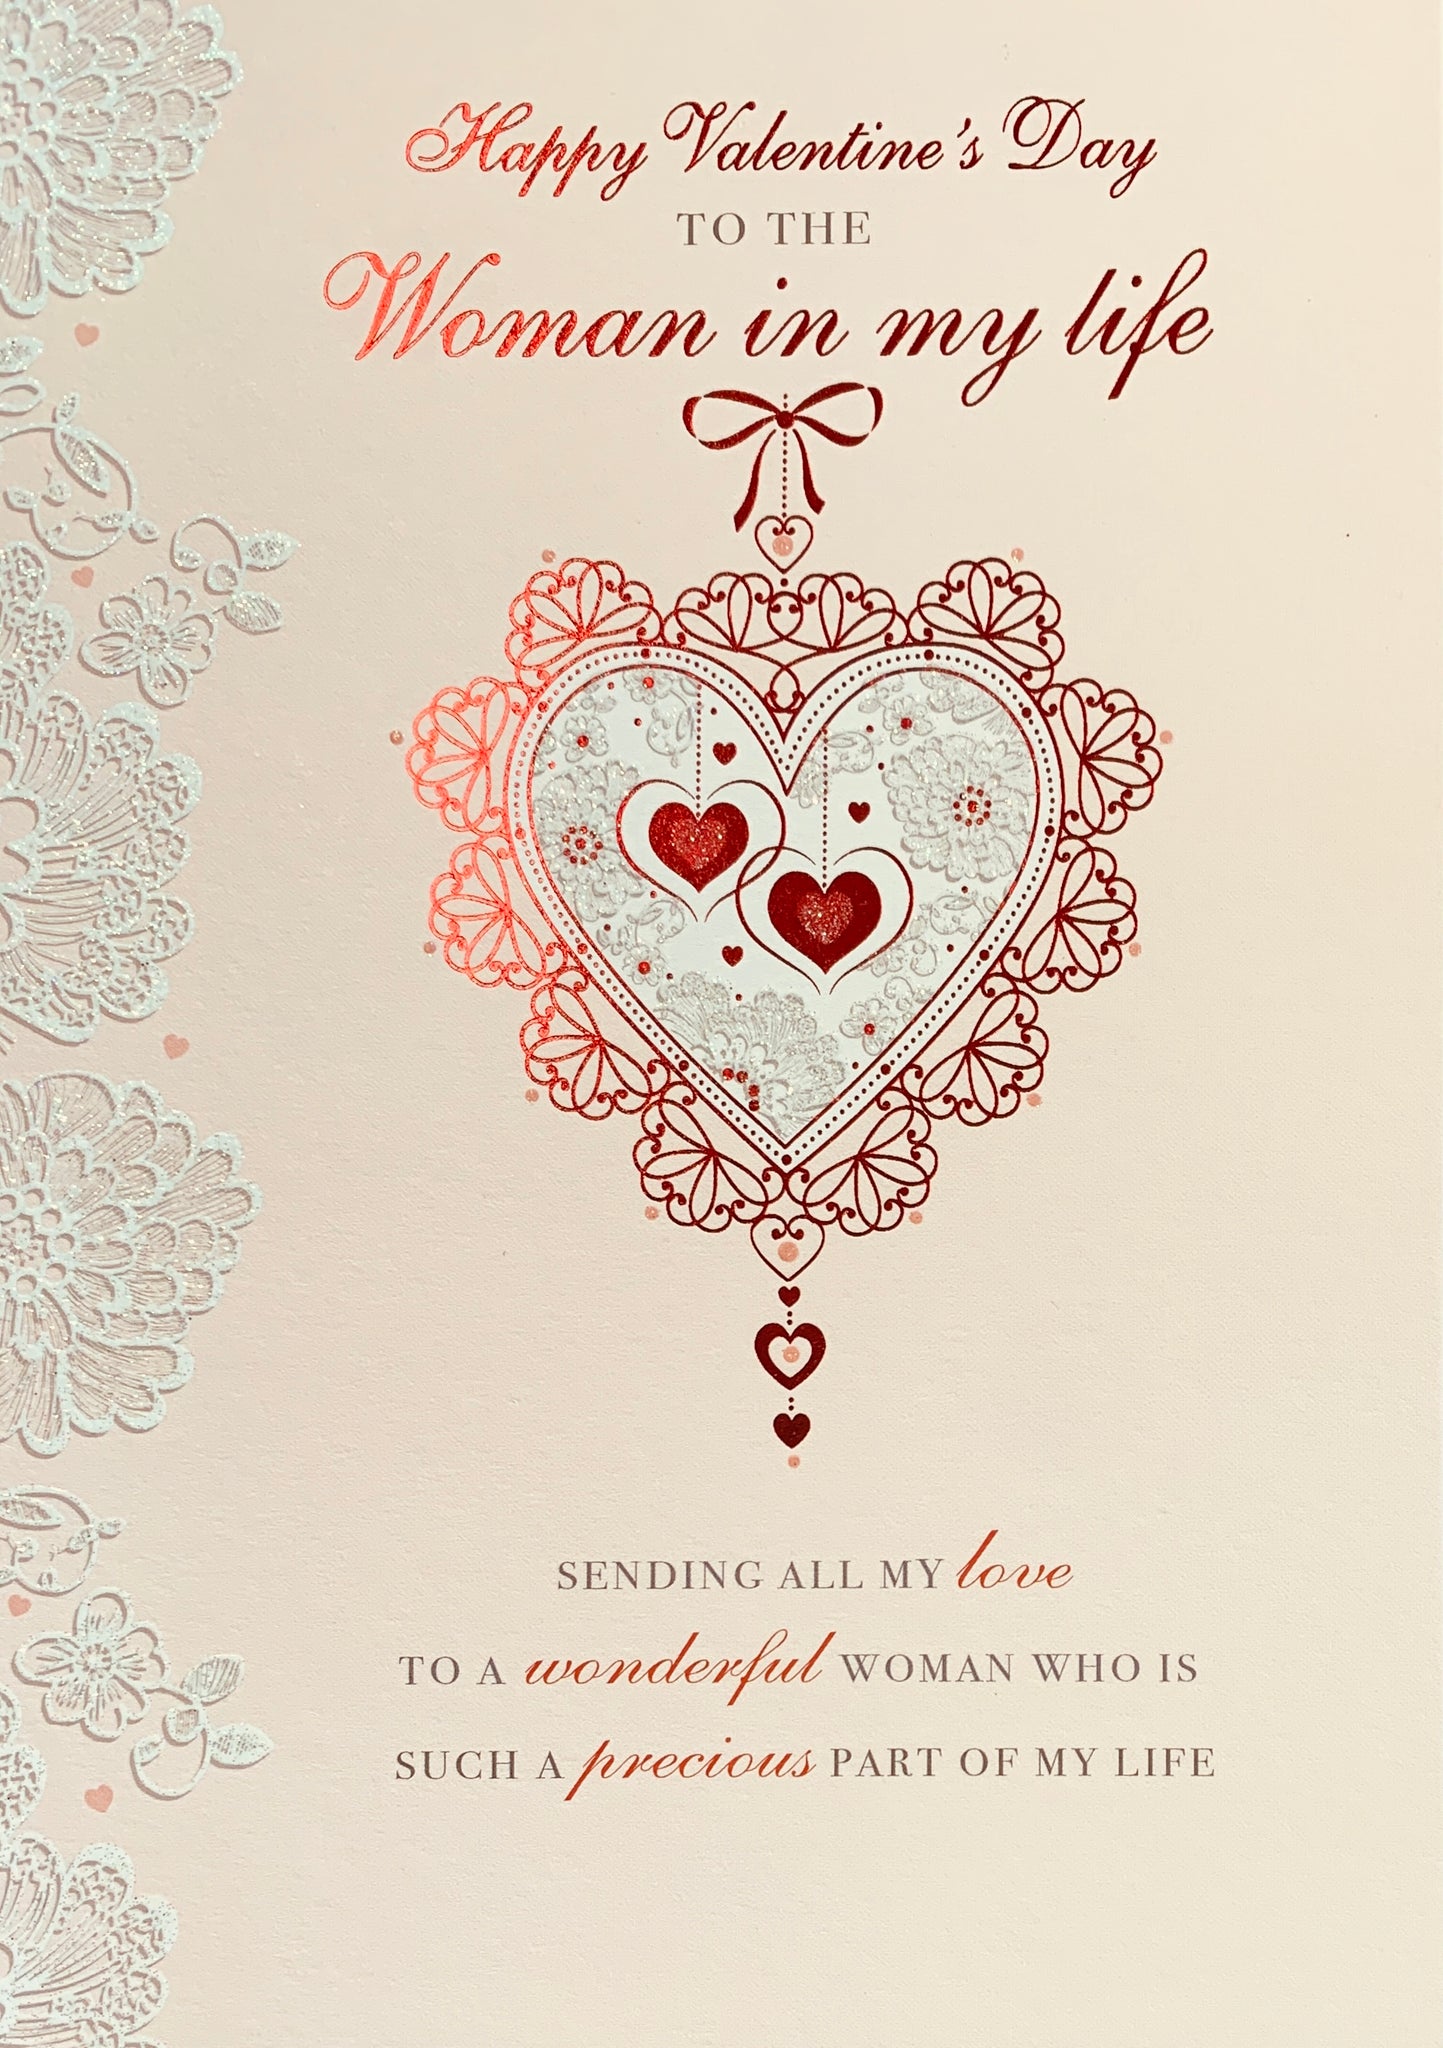 Woman in my life Valentine’s Day card- pink hearts